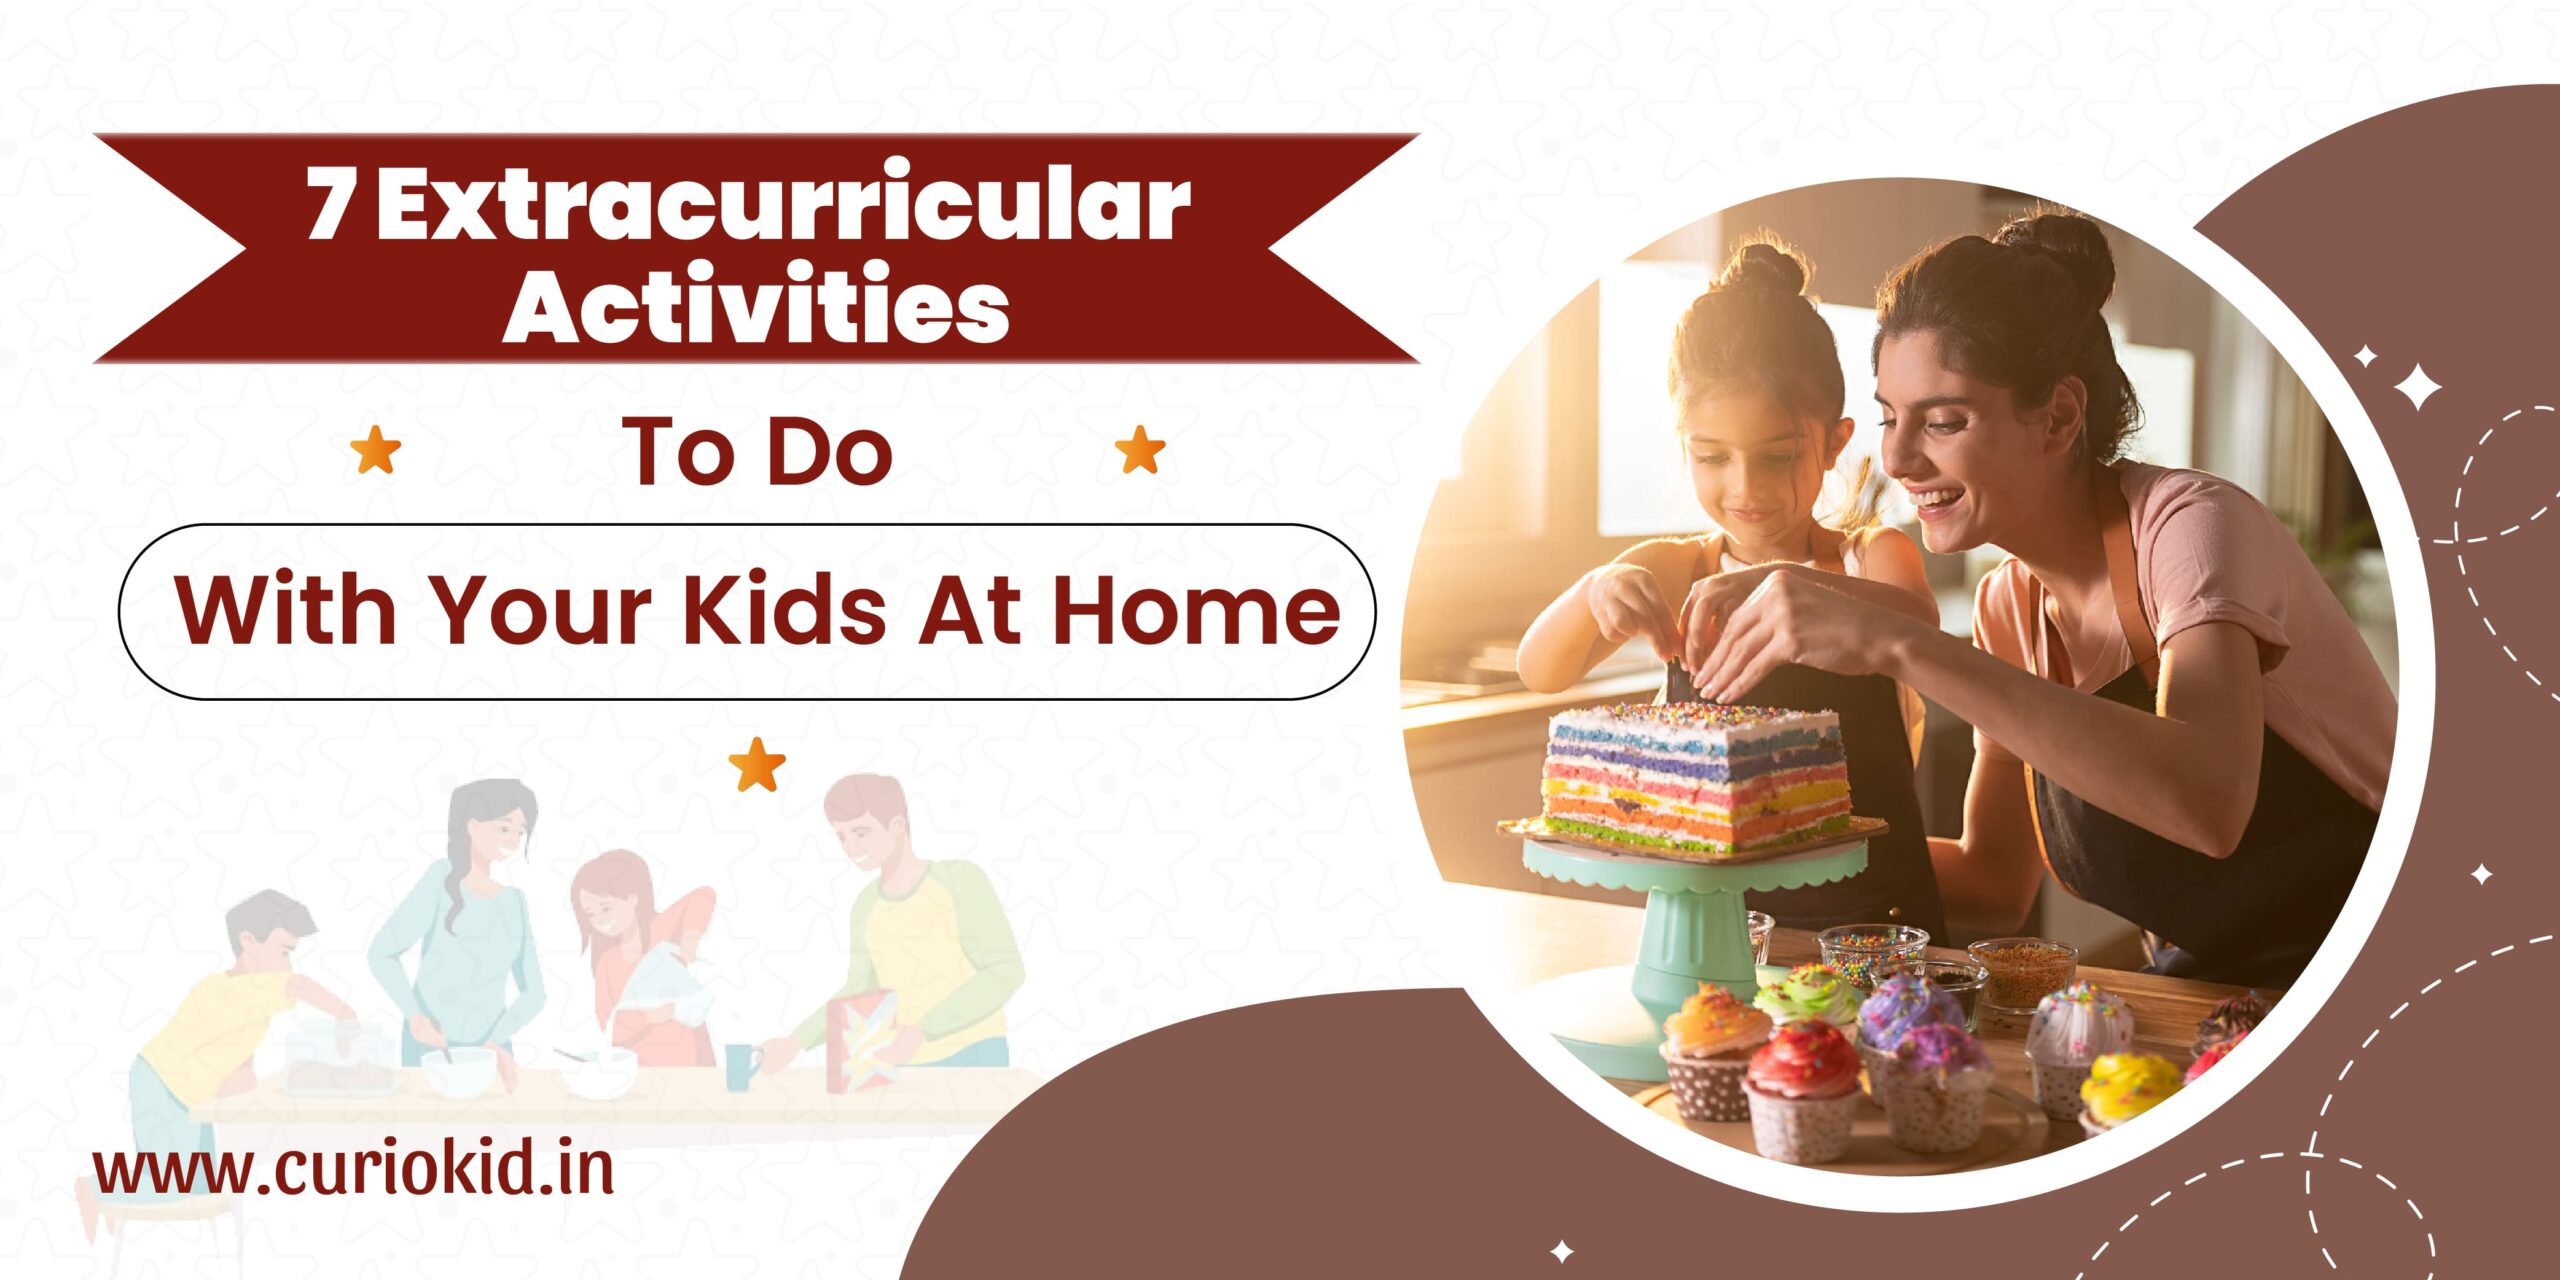 7 Extracurricular Activities To Do With Your Kids At Home